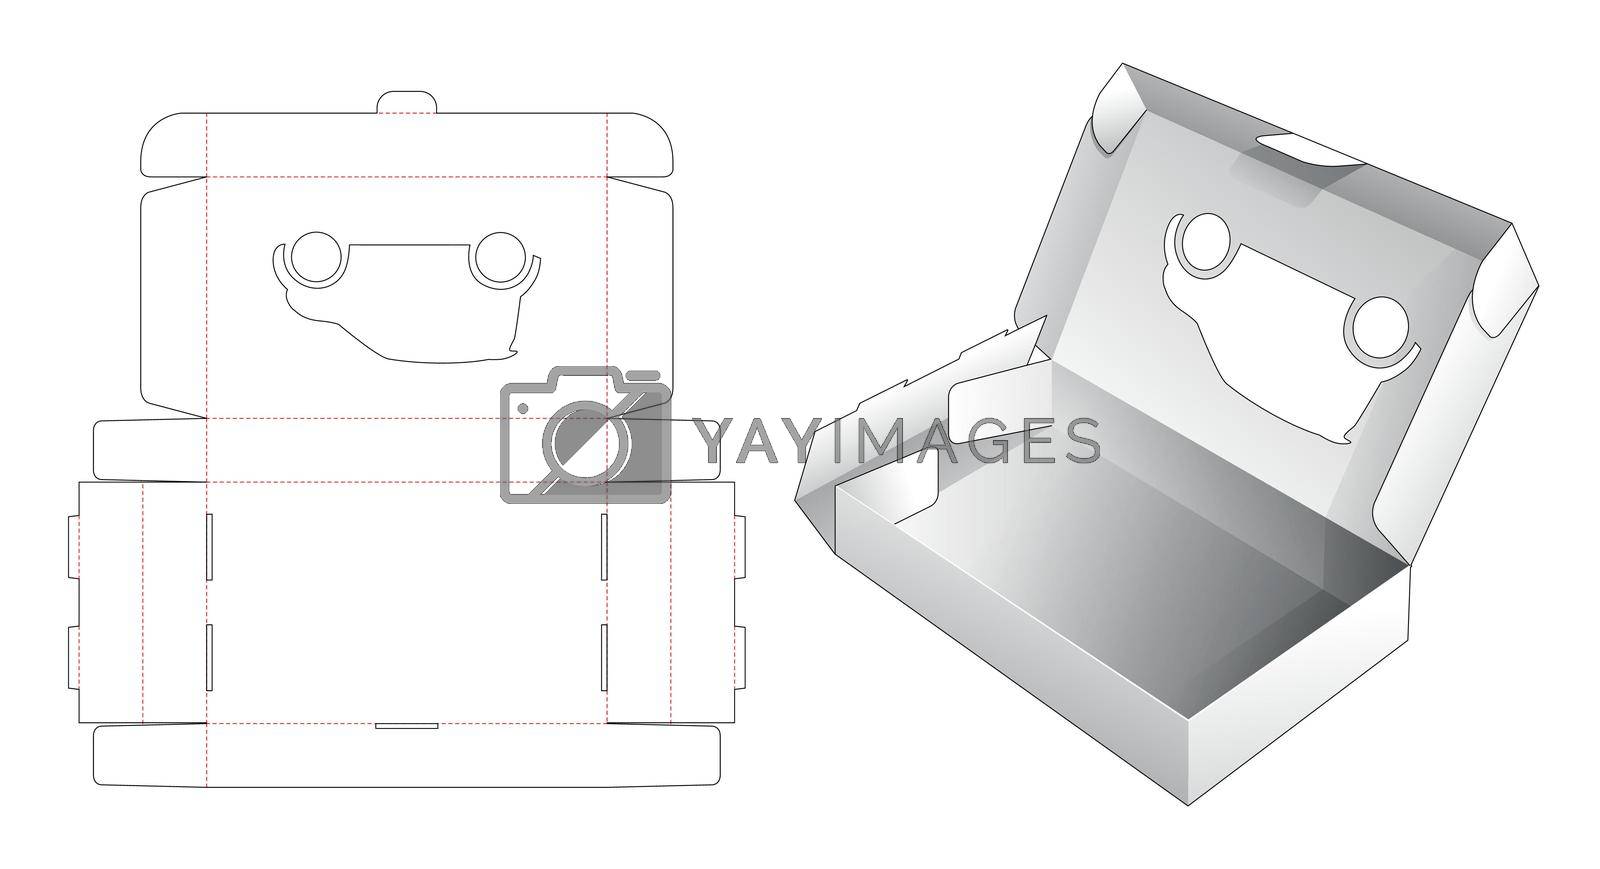 Royalty free image of Folding flip packaging box with car shaped window die cut template by valueinvestor